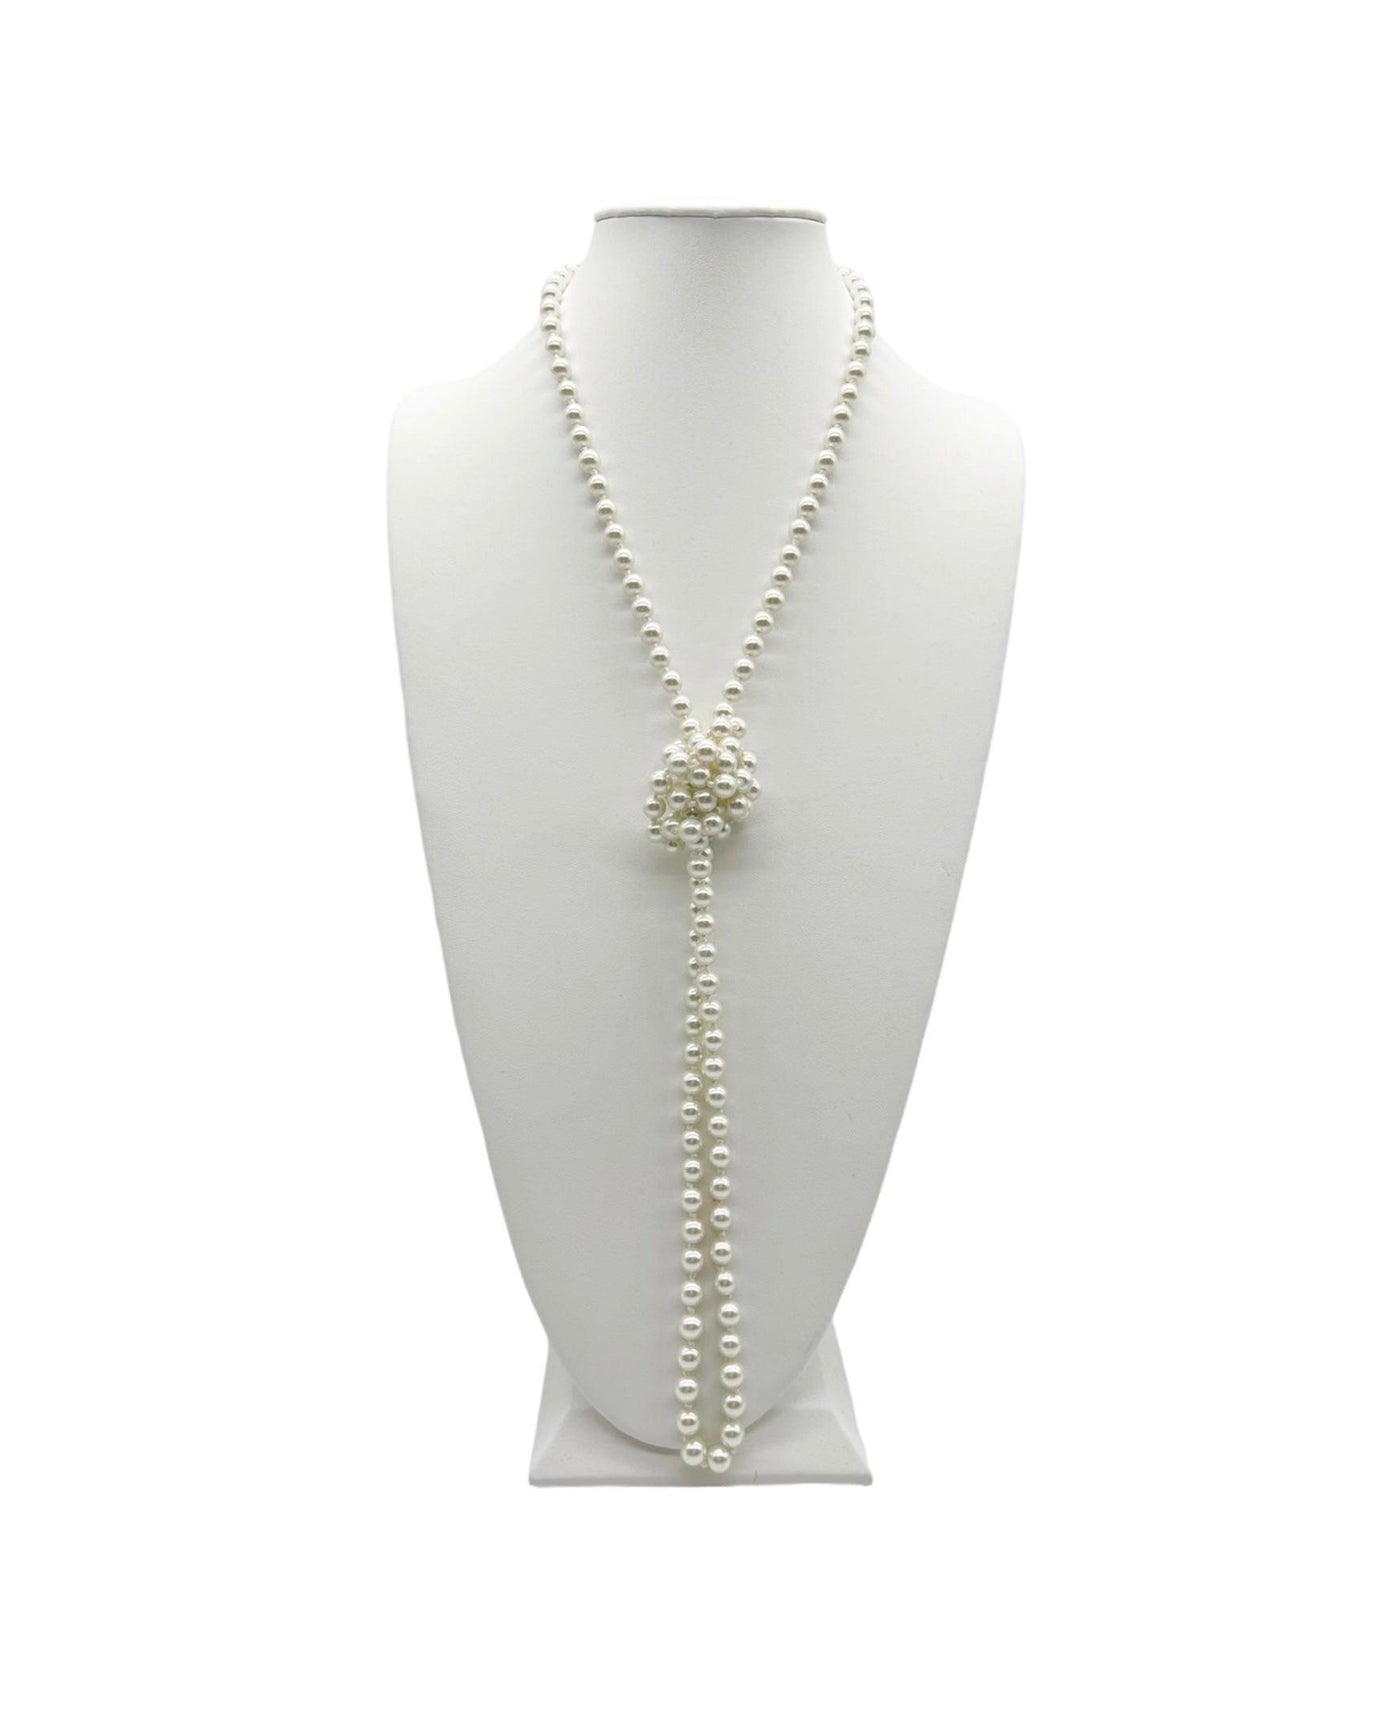 Long pearl necklace tied in a knock on a white neck display